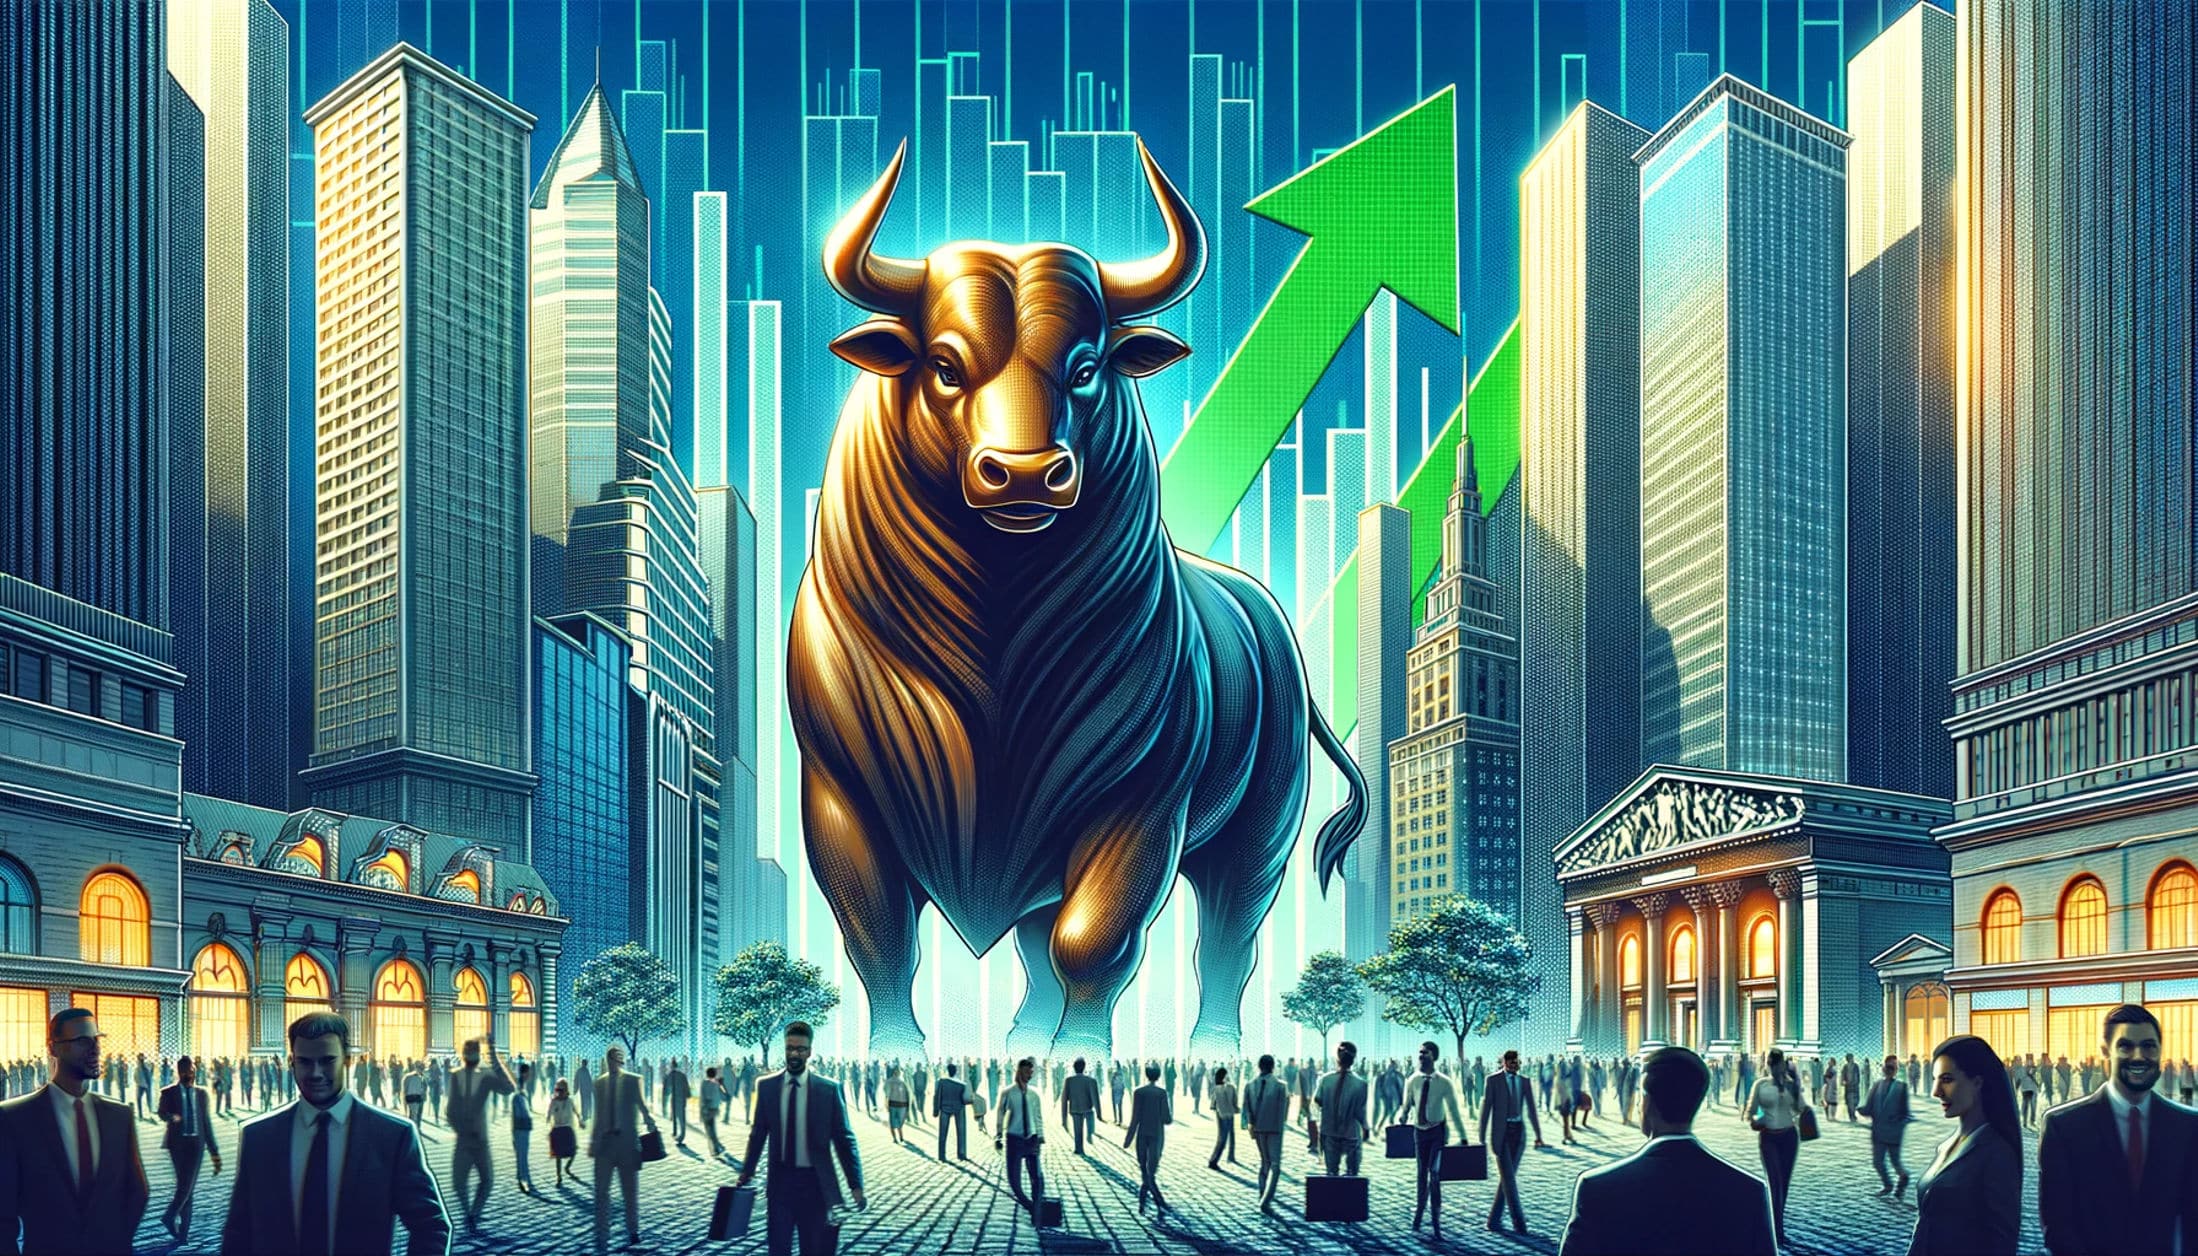 Illustration of a bull market, showing a majestic bull in a crowded financial district with green arrows pointing upward symbolizing rising stock prices.